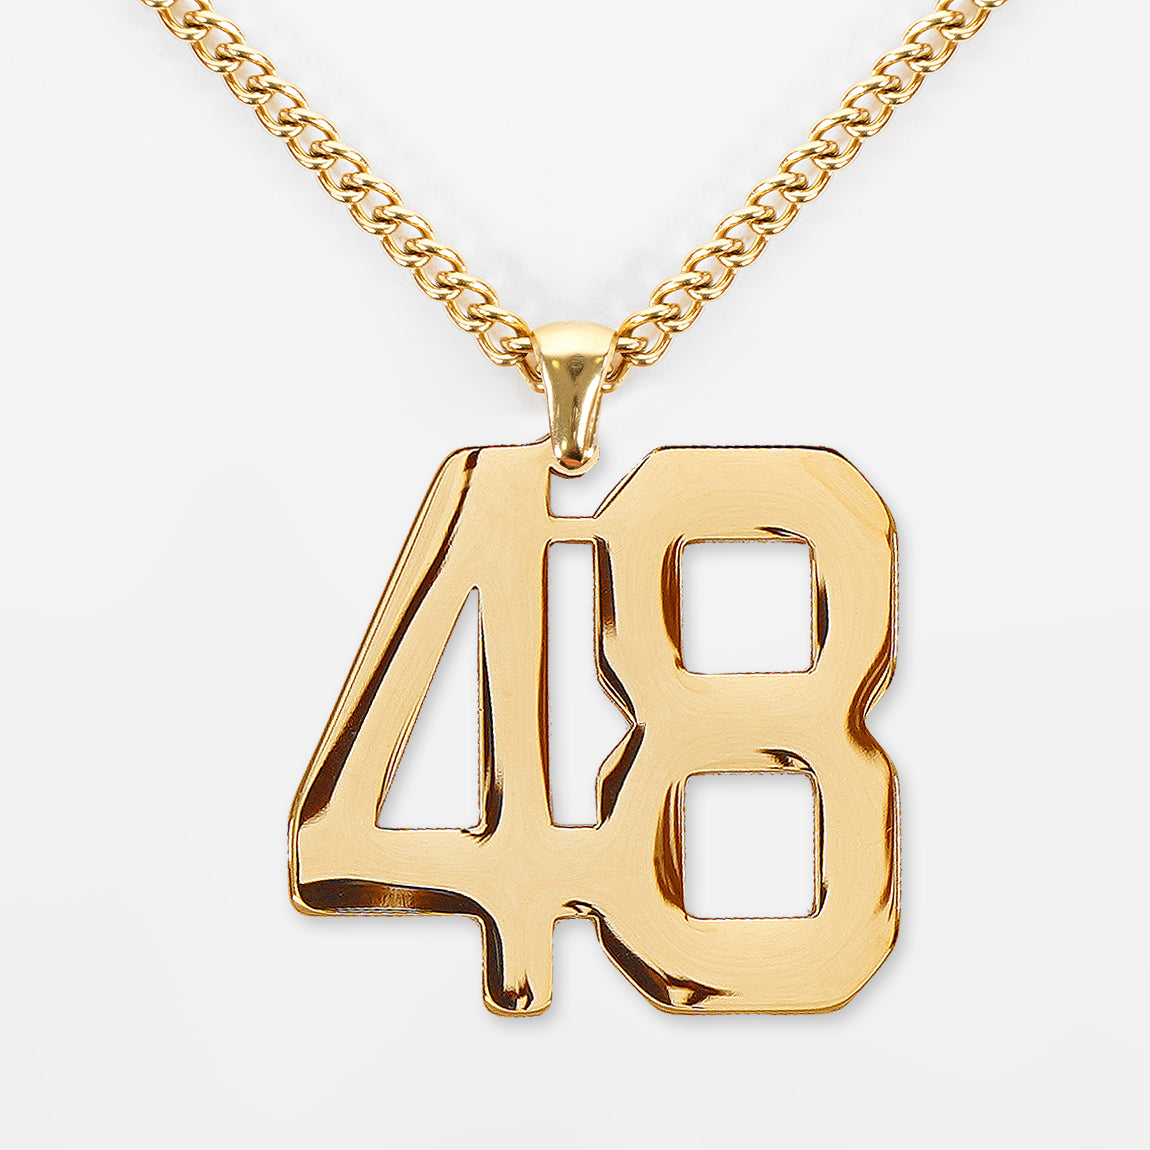 48 Number Pendant with Chain Necklace - Gold Plated Stainless Steel